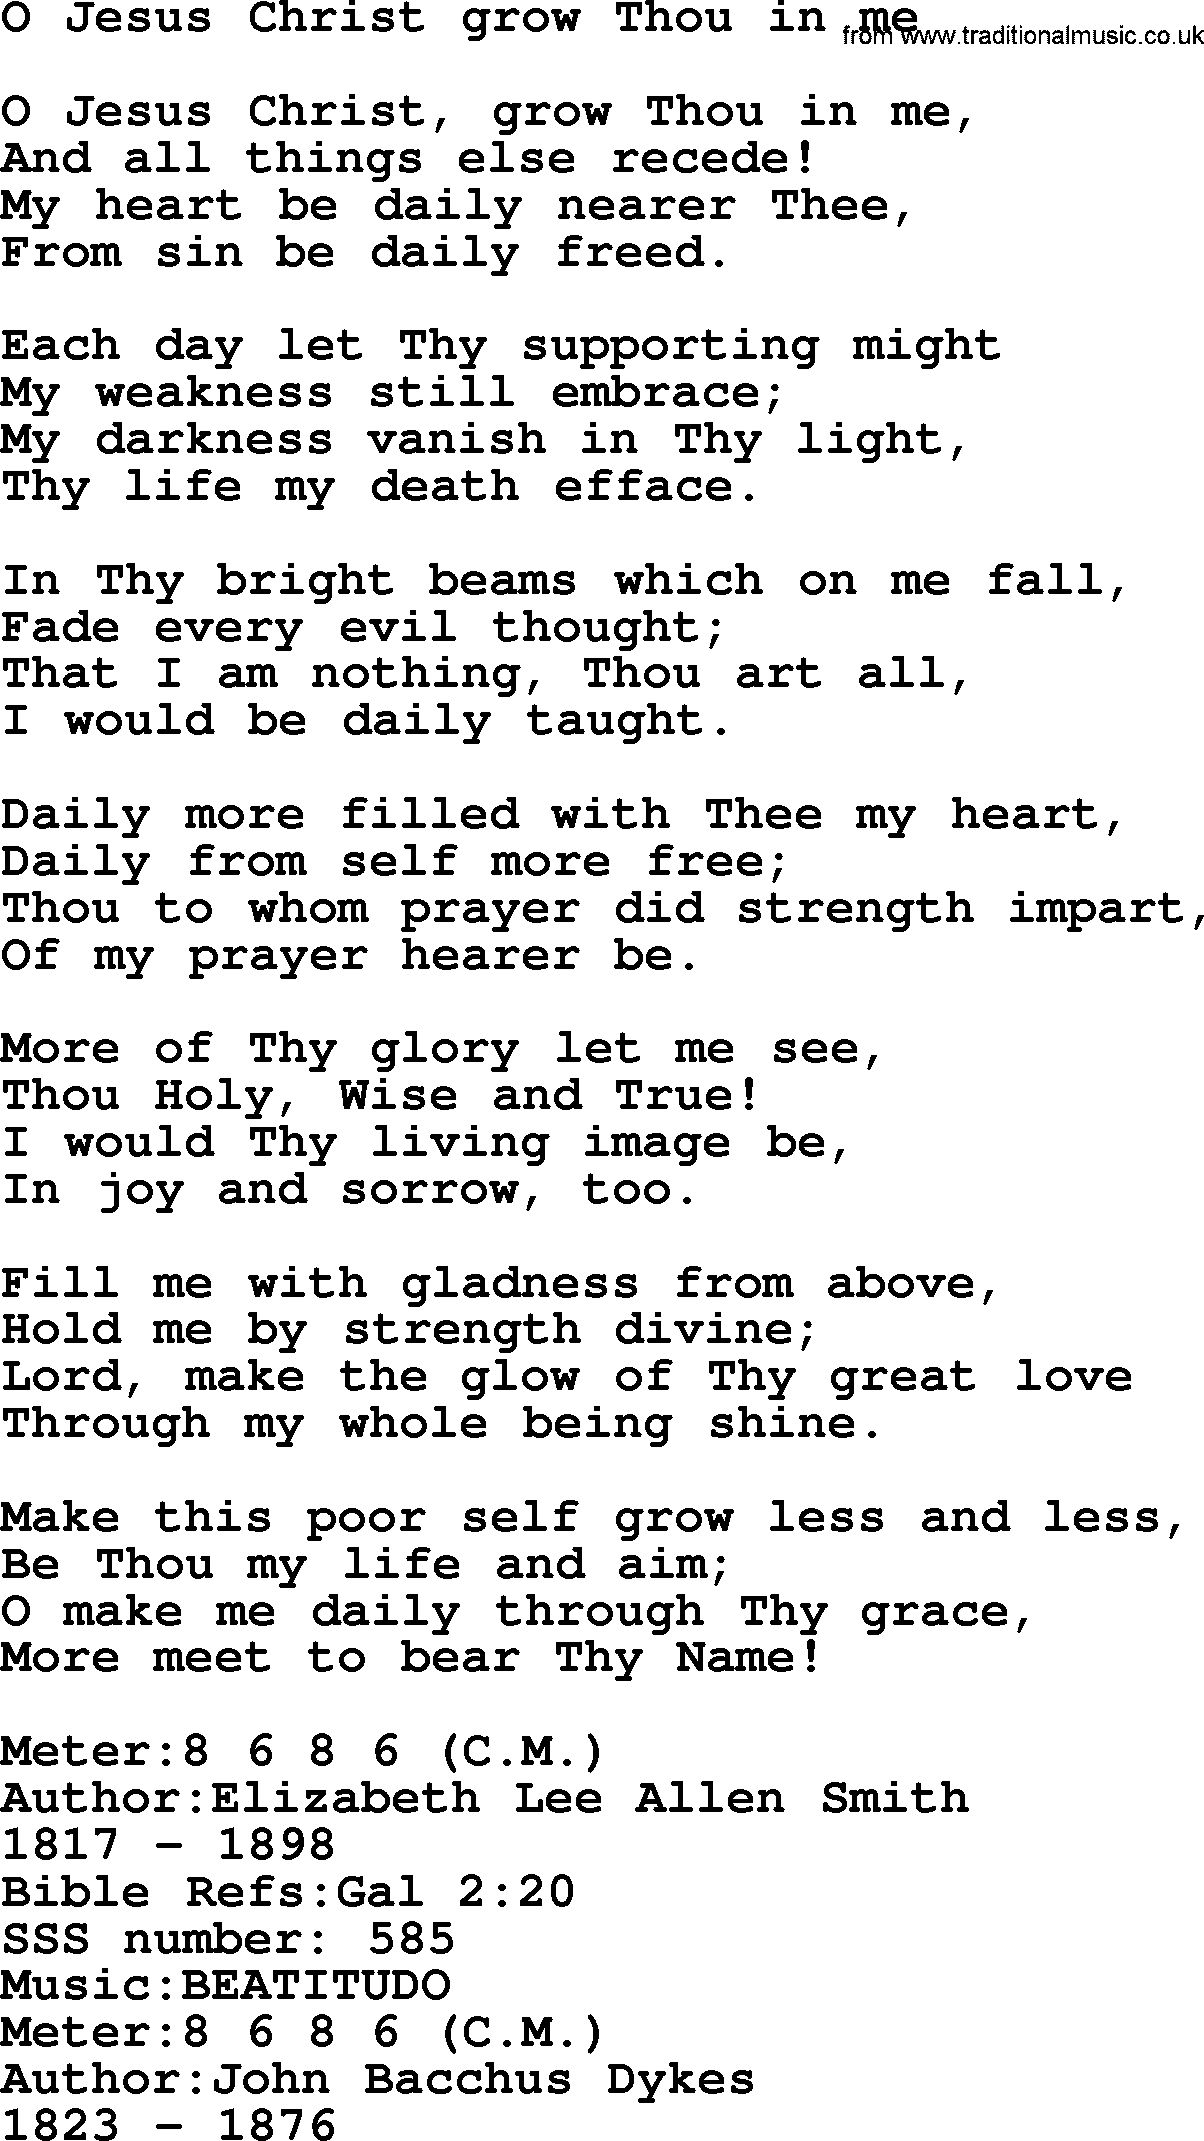 Sacred Songs and Solos complete, 1200 Hymns, title: O Jesus Christ Grow Thou In Me, lyrics and PDF